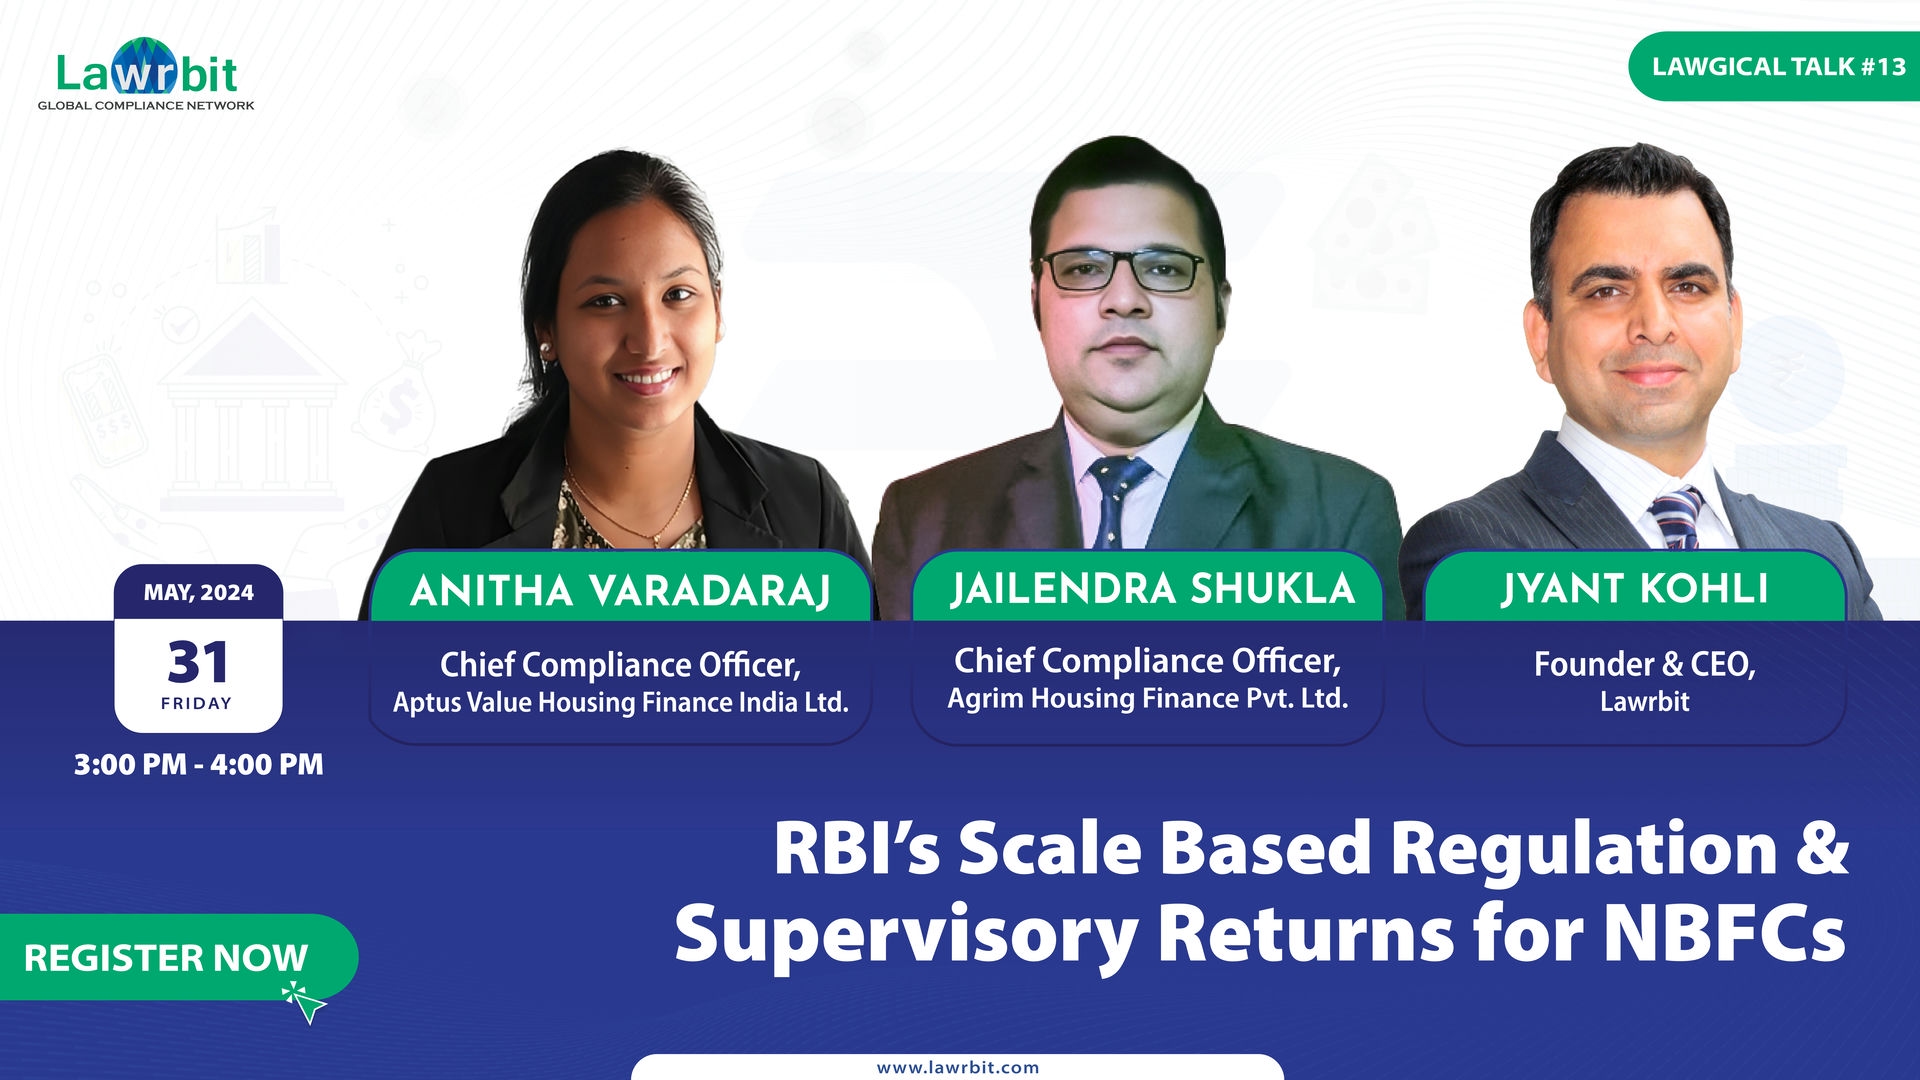 Brief about Scale Based Regulations and Returns for NBFC by Chief Compliance Officer